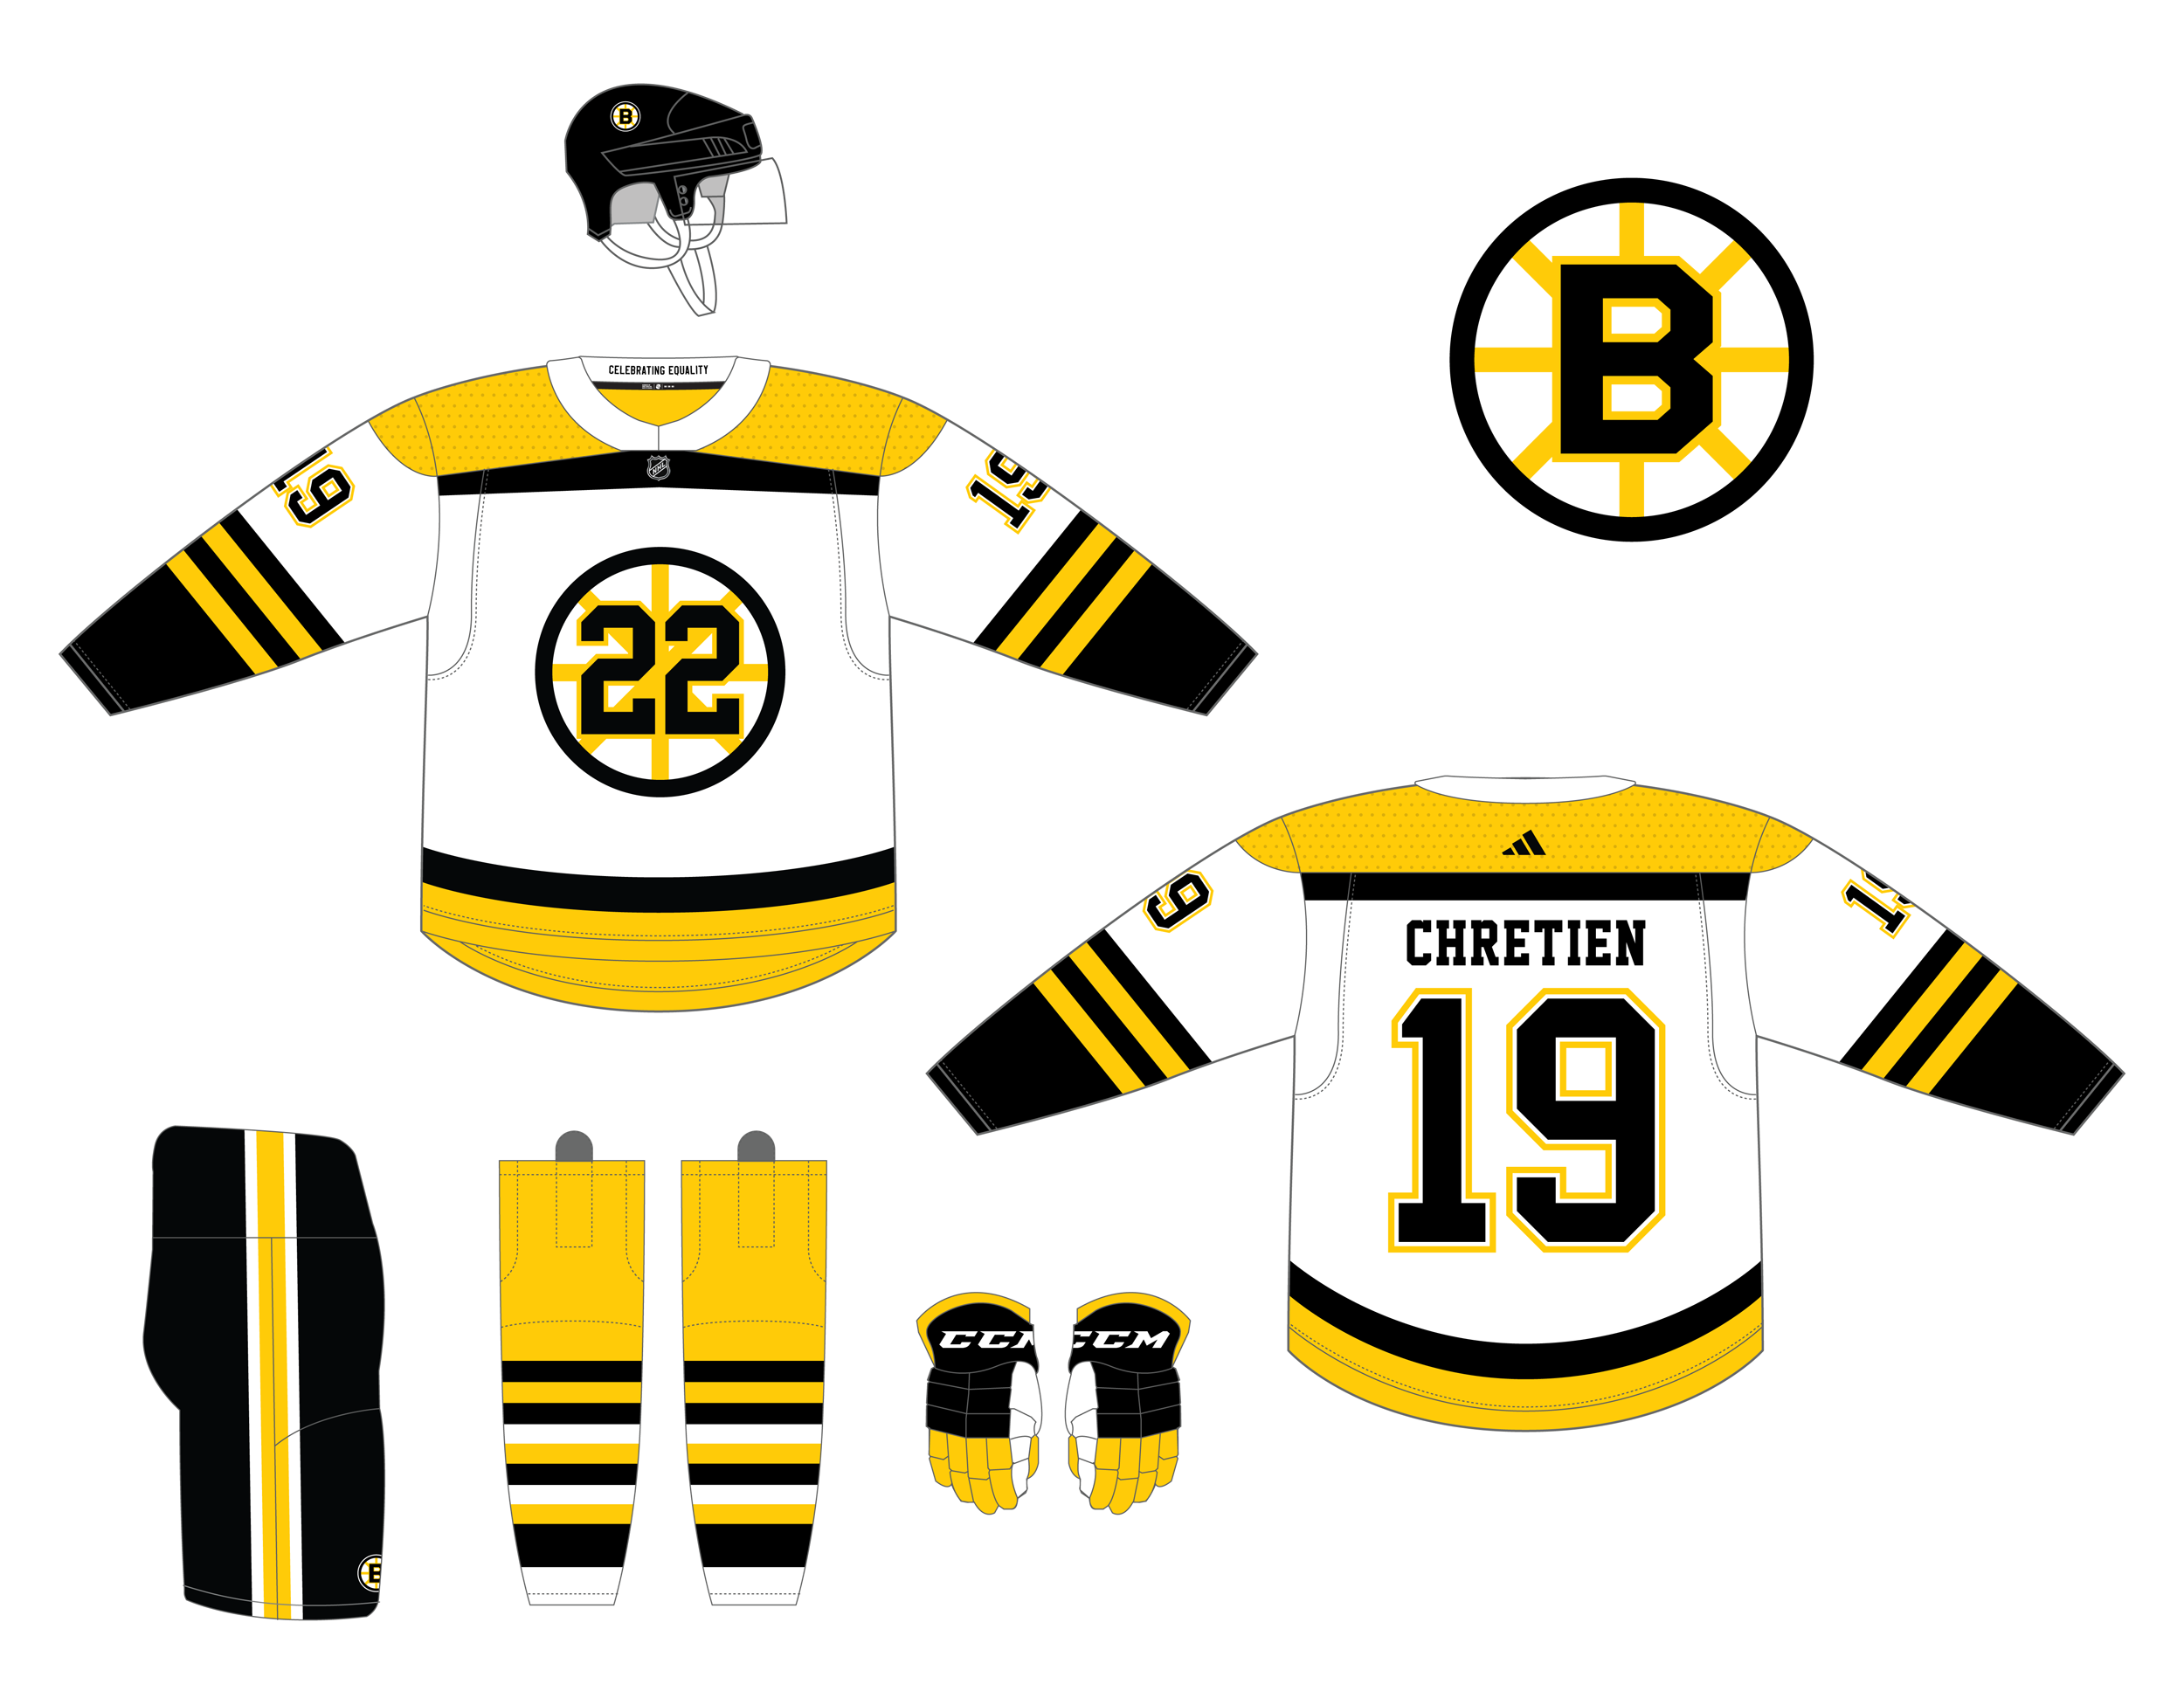 Duotone jersey concept for the Boston Bruins of the NHL. I used